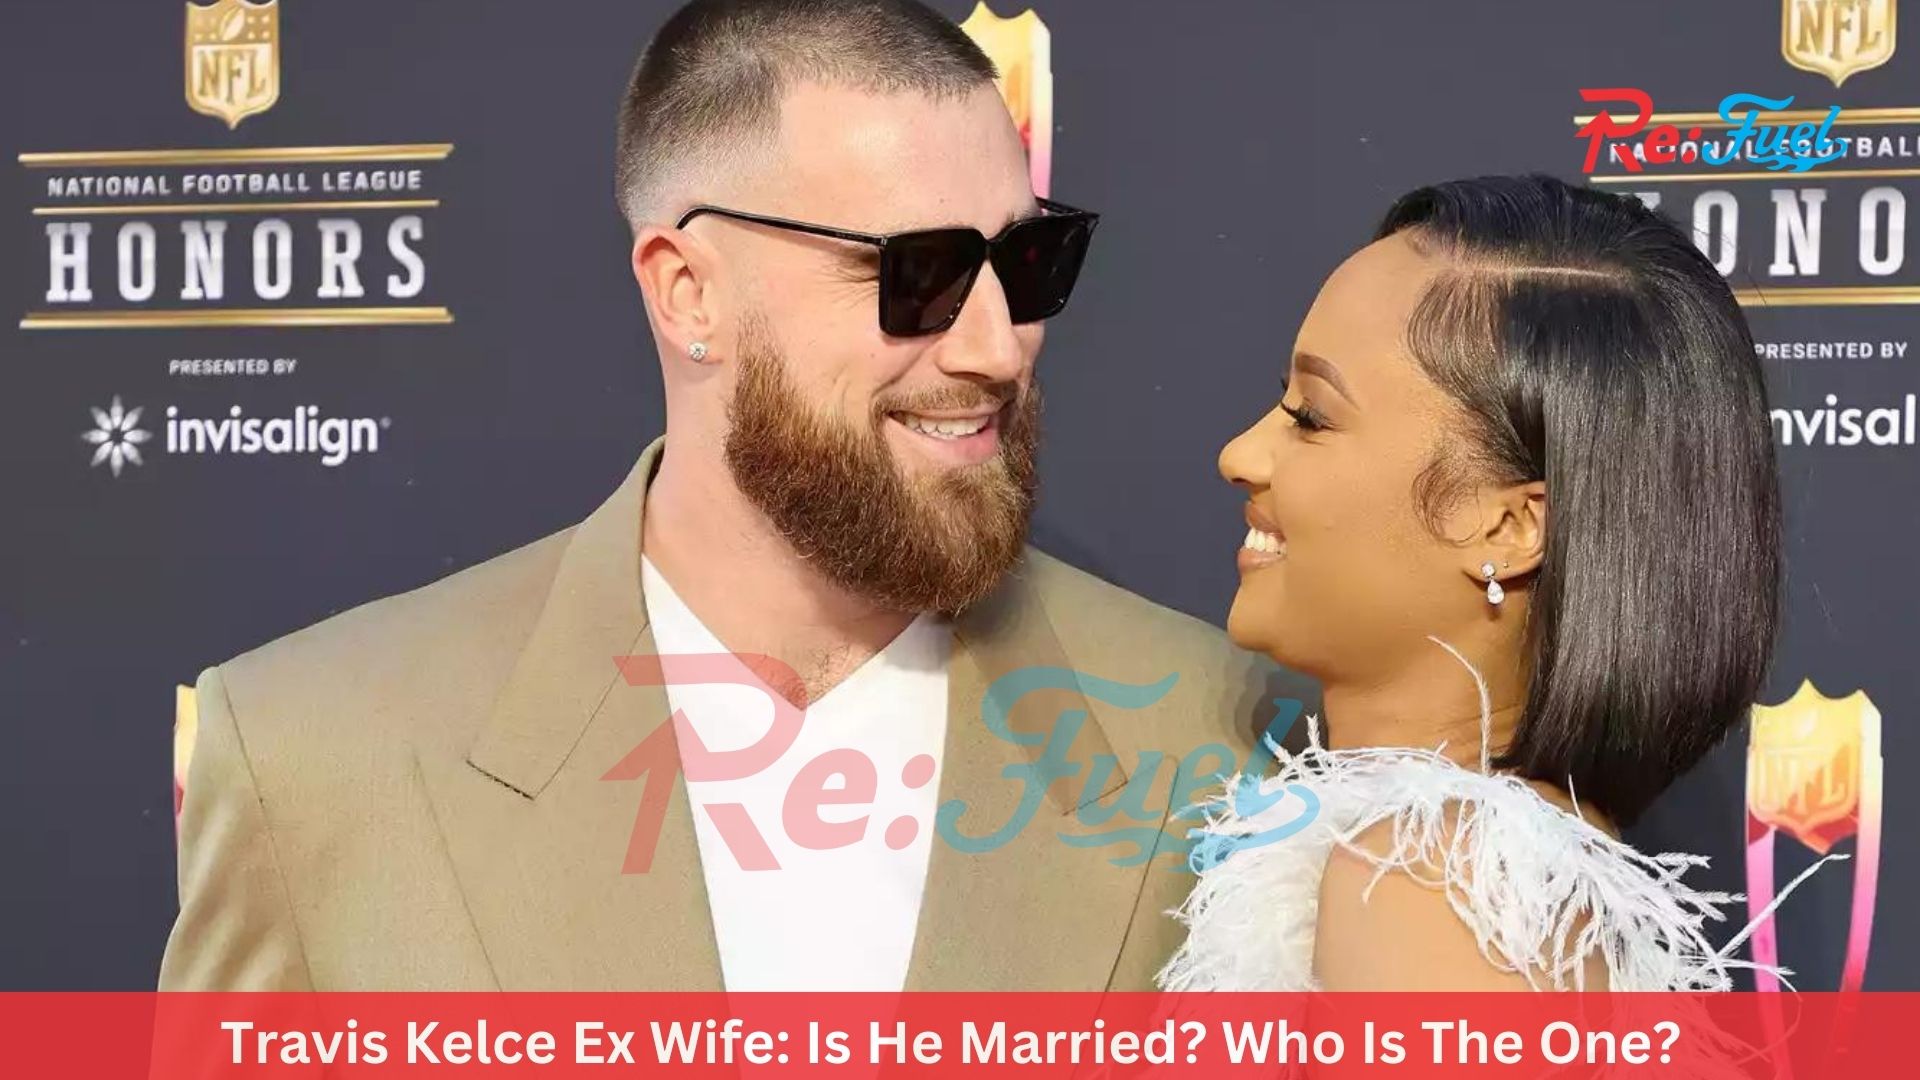 Travis Kelce Ex Wife: Is He Married? Who Is The One?